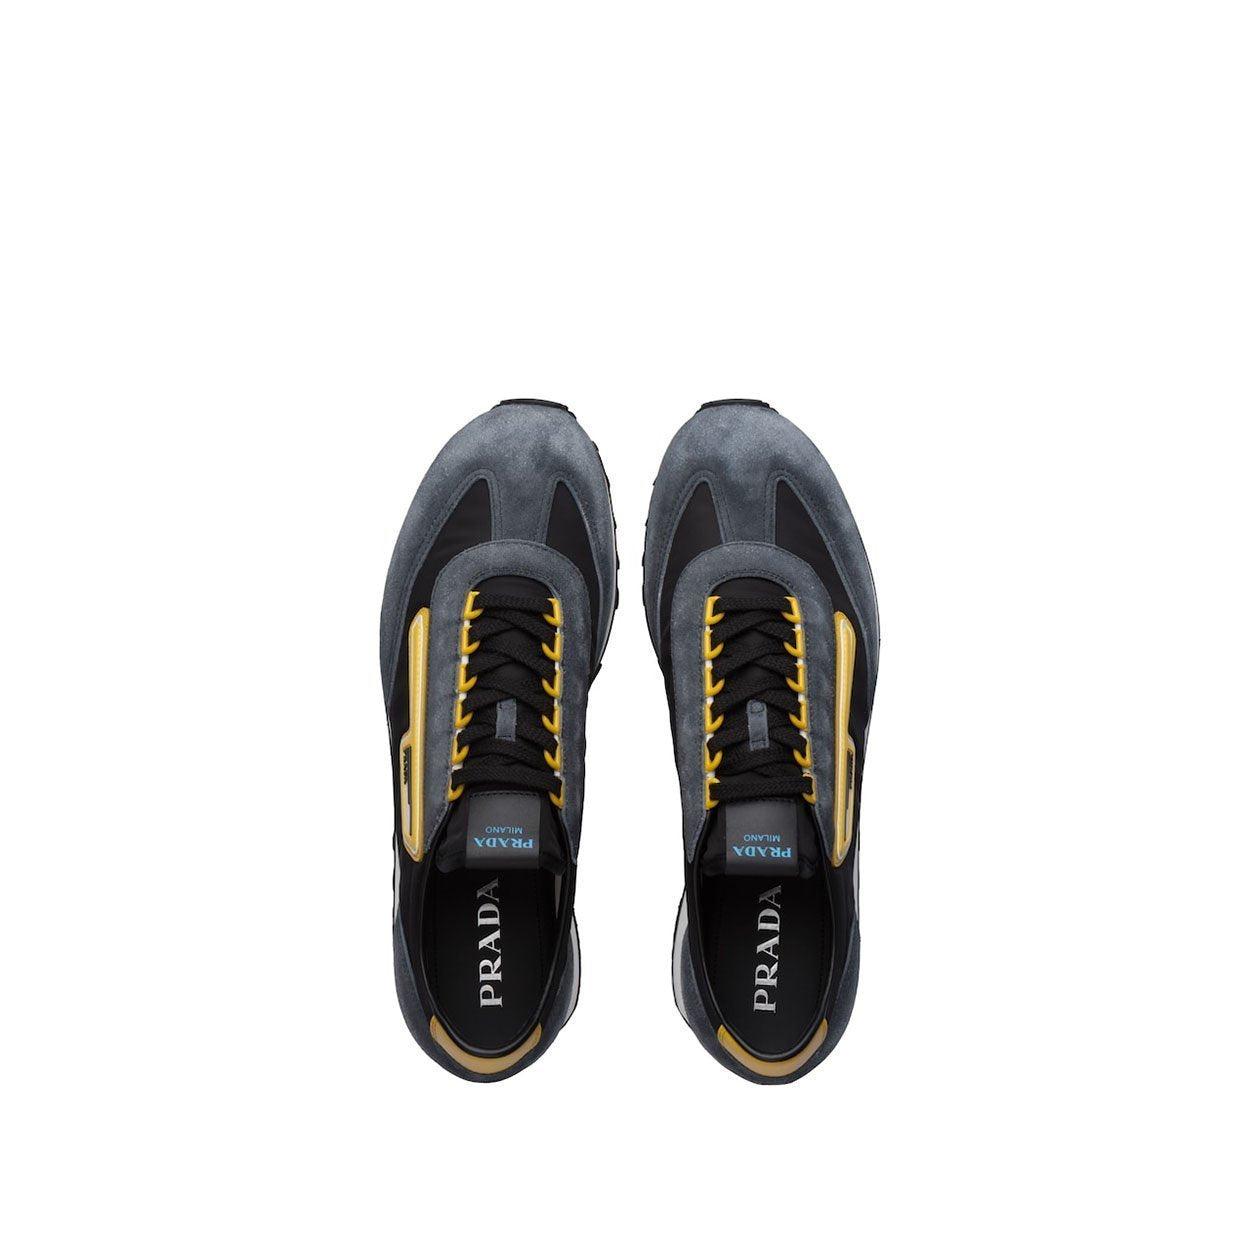 Prada 2eg276-3kuy Shoes Black & Yellow Cloudbust Technical Fabric / Suede  Leather Casual Sneakers (prm1017) for Men | Lyst